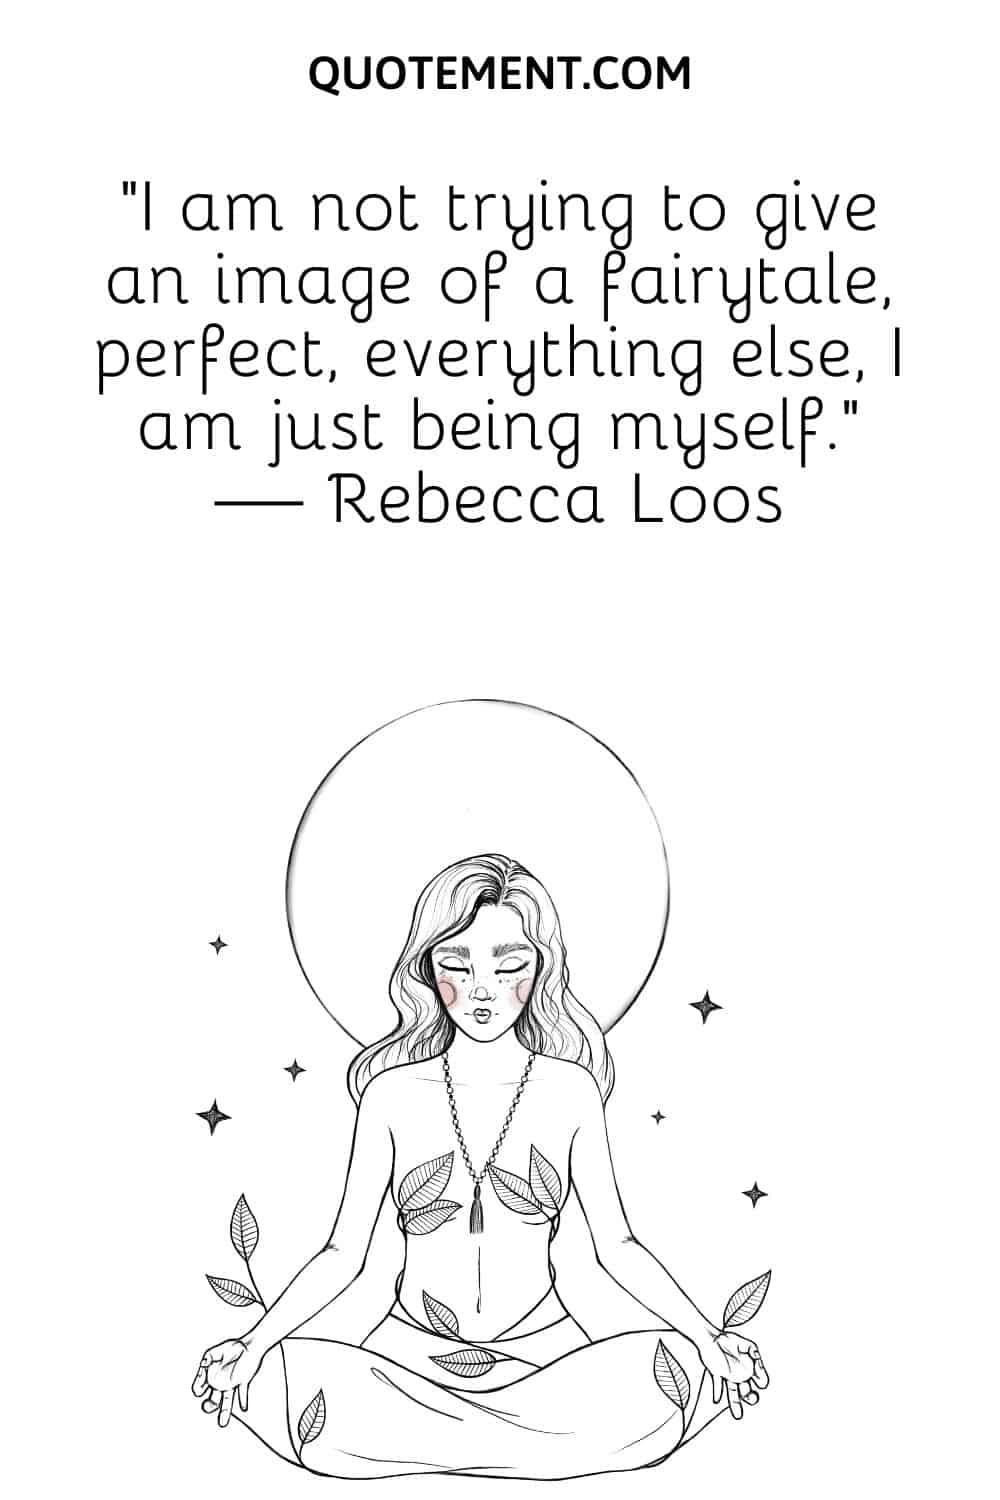 I am not trying to give an image of a fairytale, perfect, everything else, I am just being myself